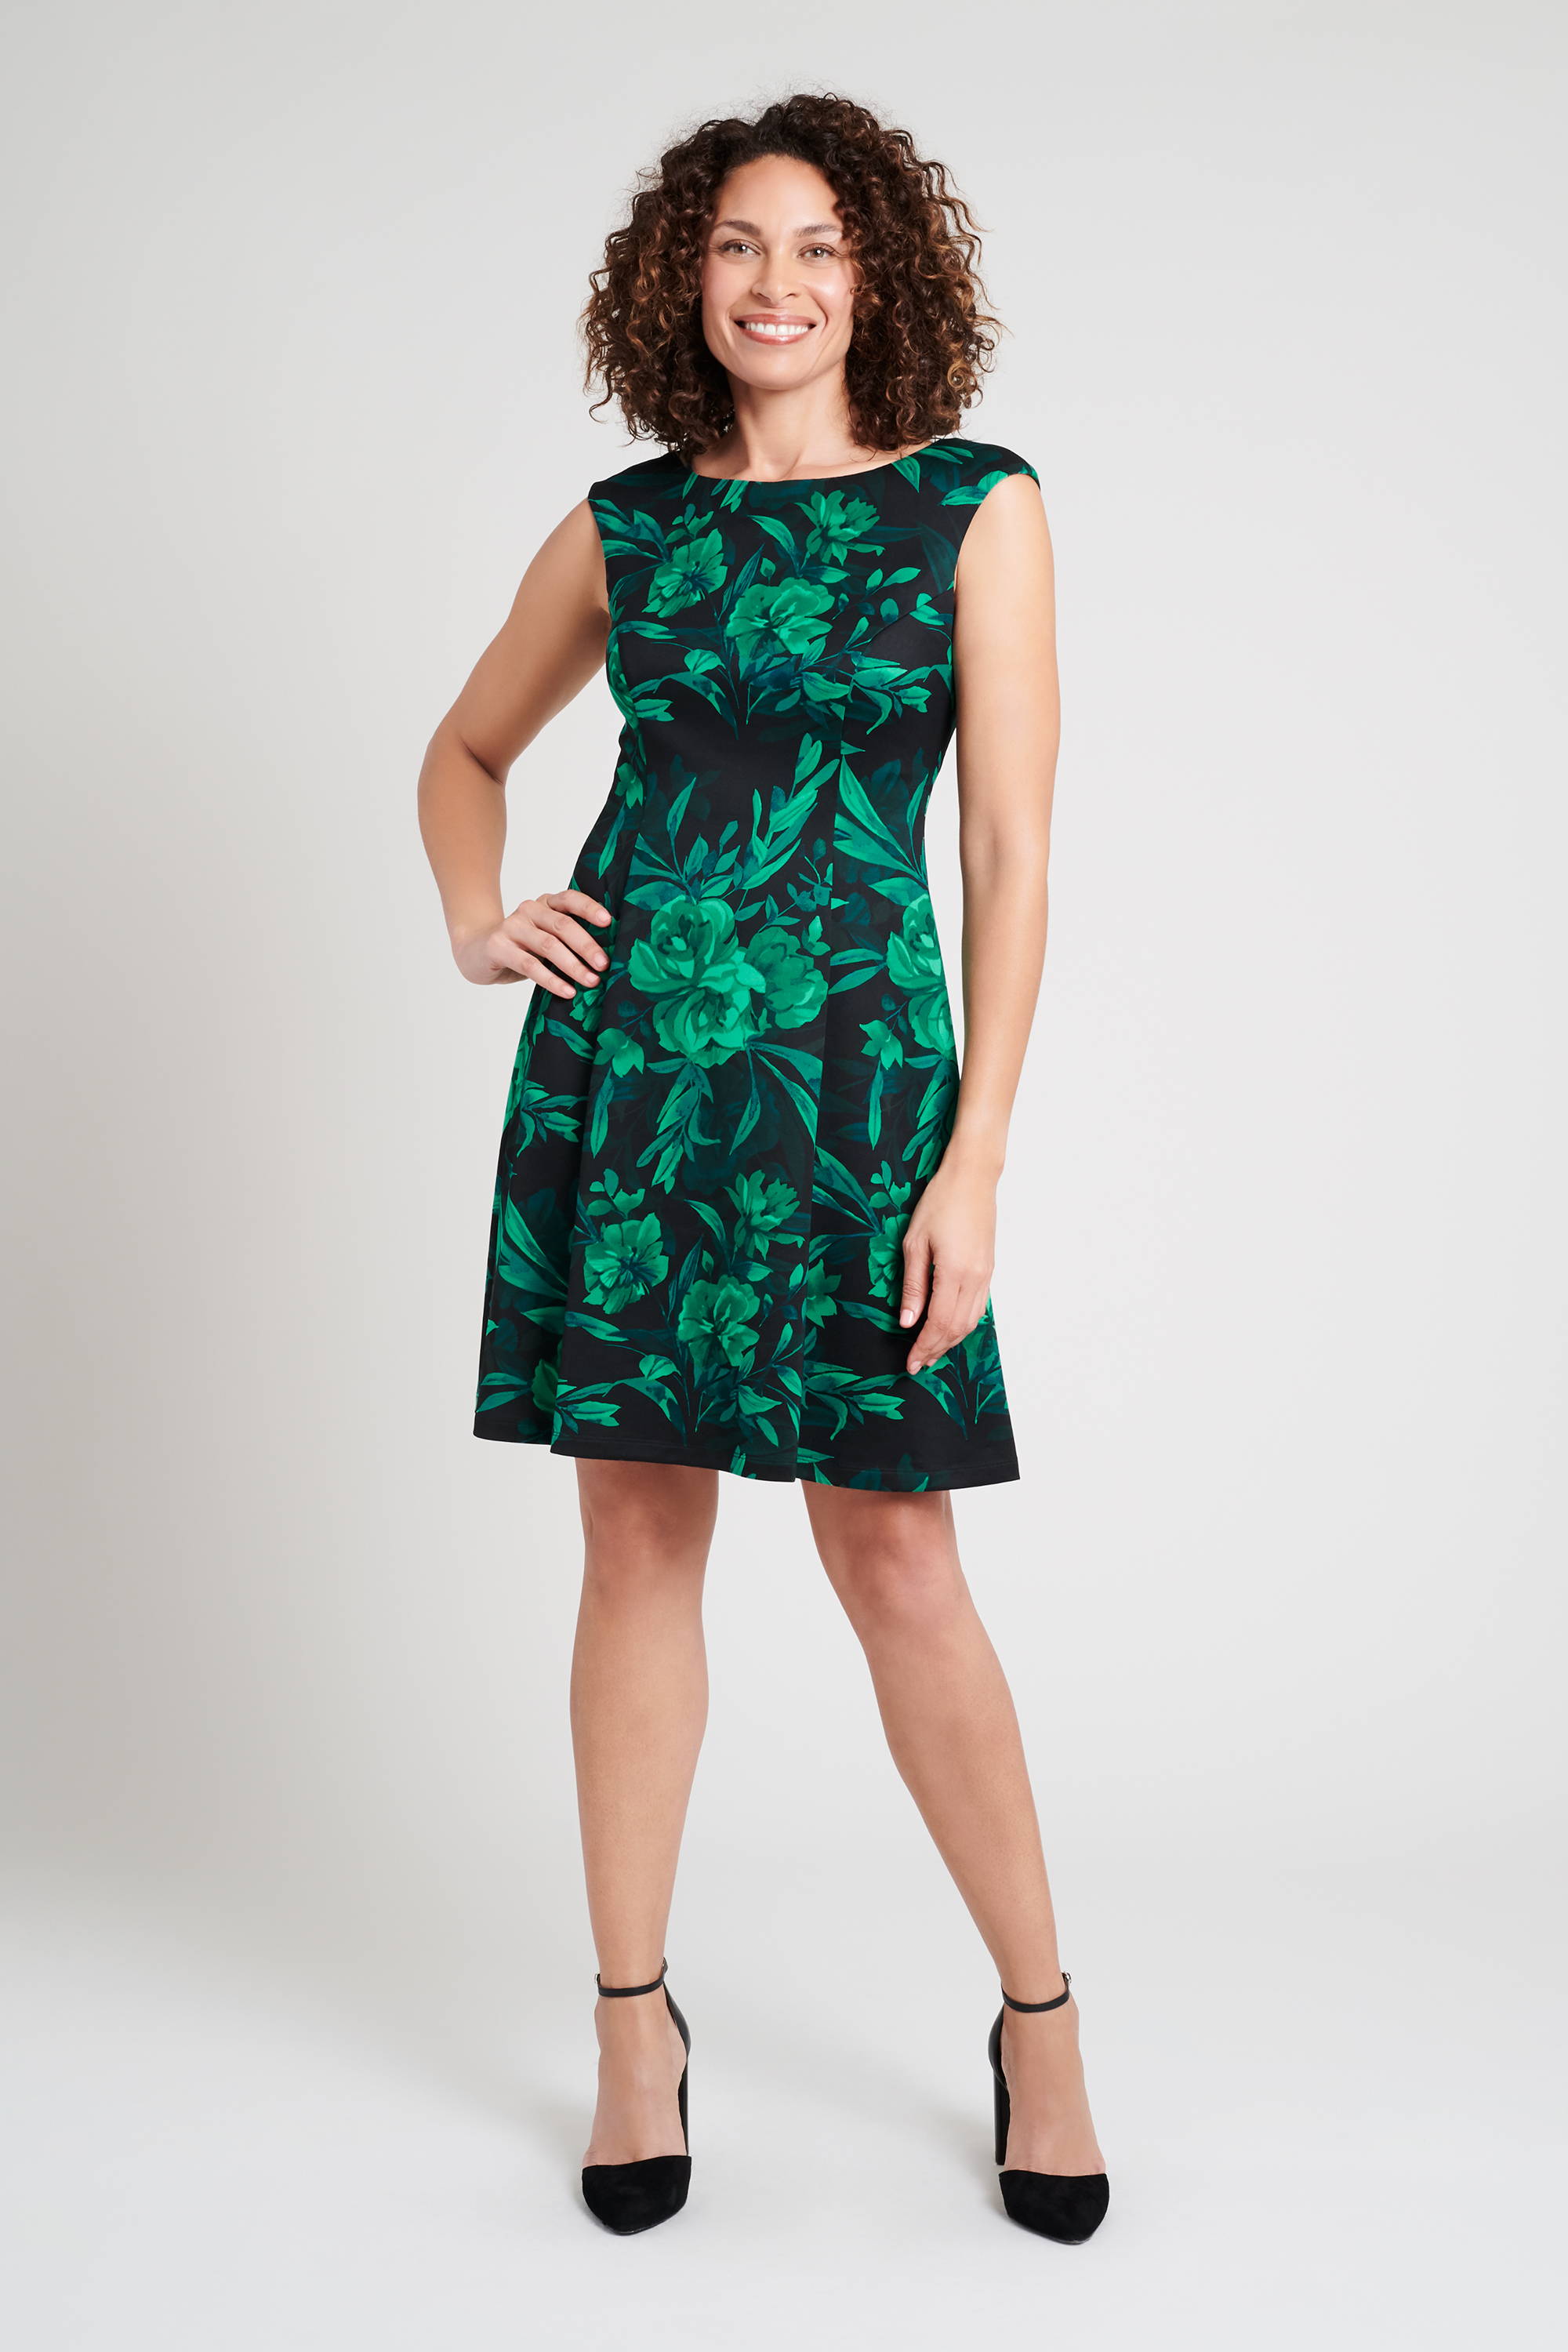 woman posing in green and black floral print sleeveless above-the-knee connected apparel dress